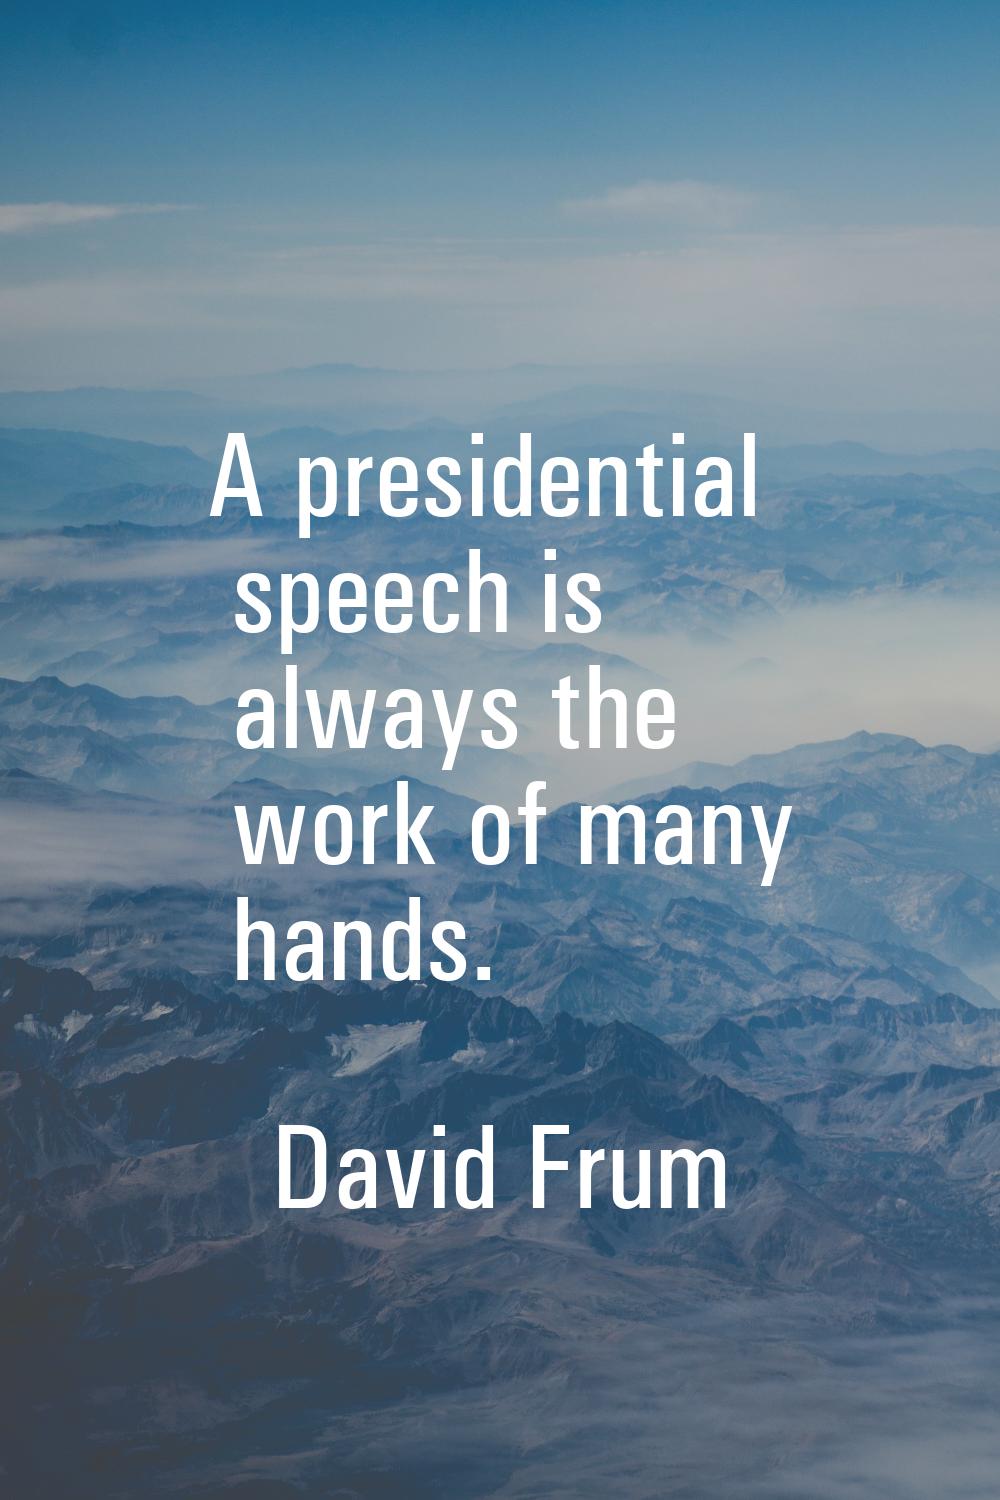 A presidential speech is always the work of many hands.